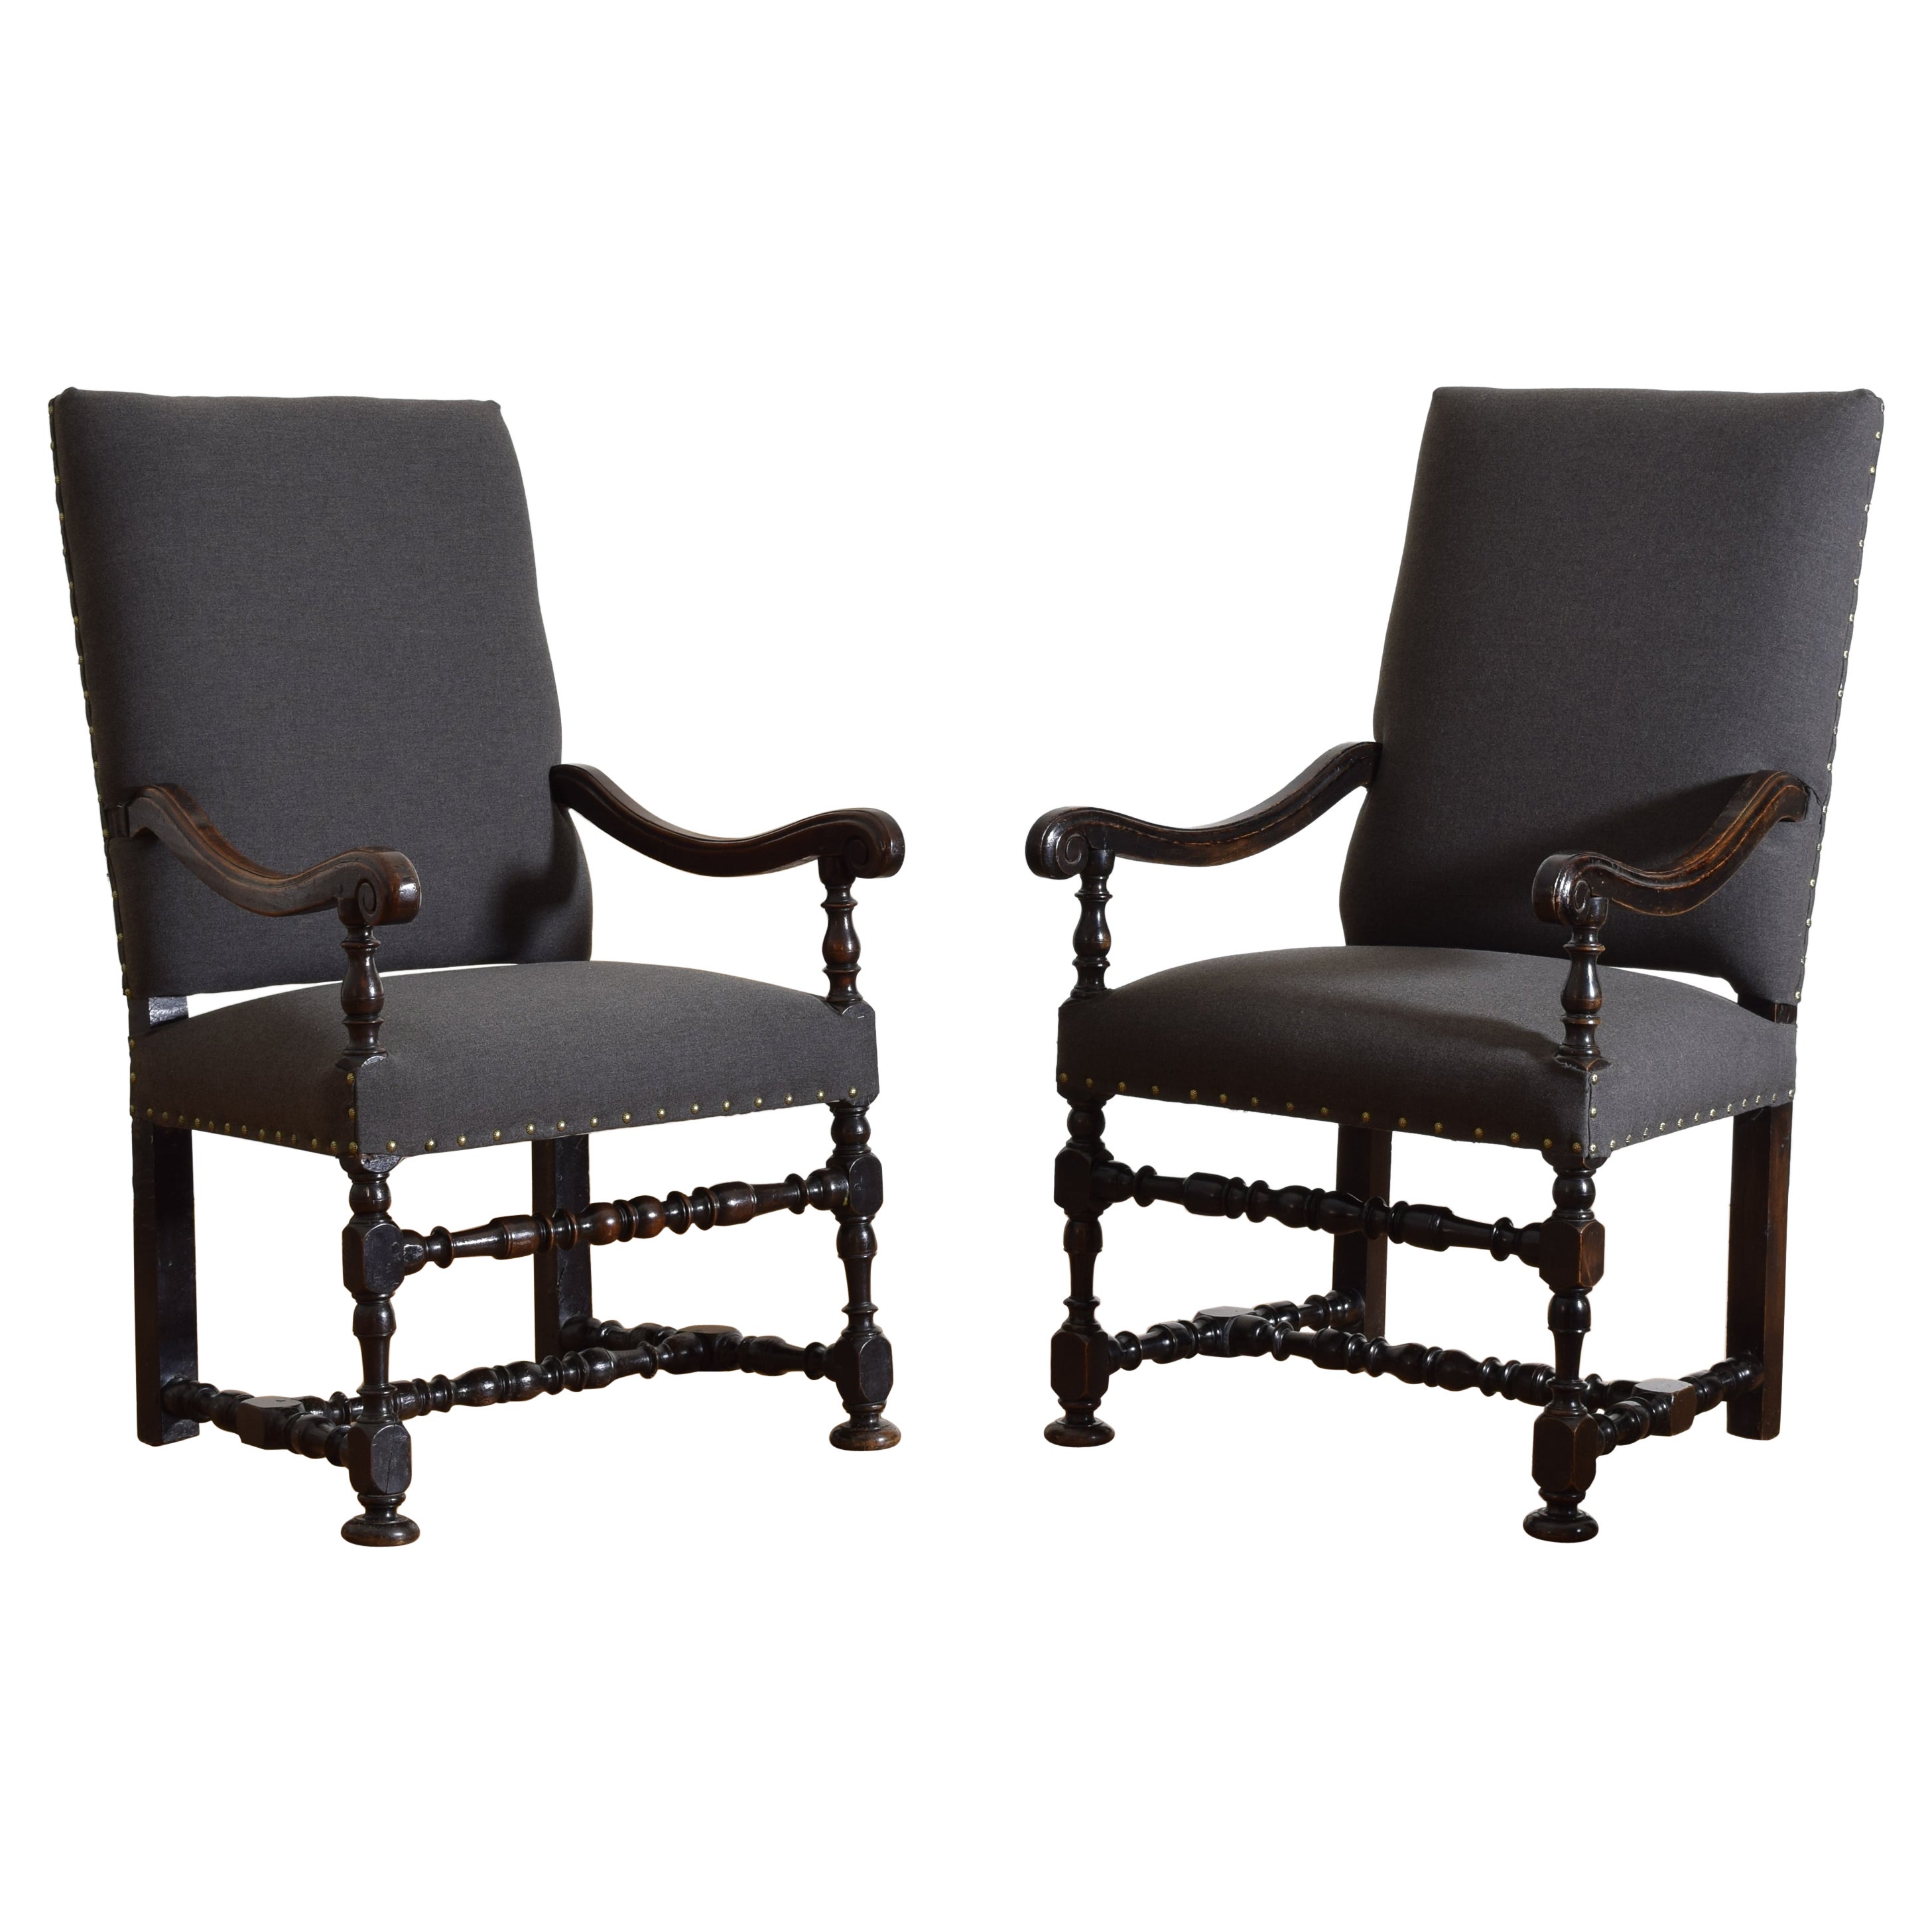 Pair of Italian Louis XIV Period Dark Walnut & Upholstered Poltrone, ca. 1700 For Sale